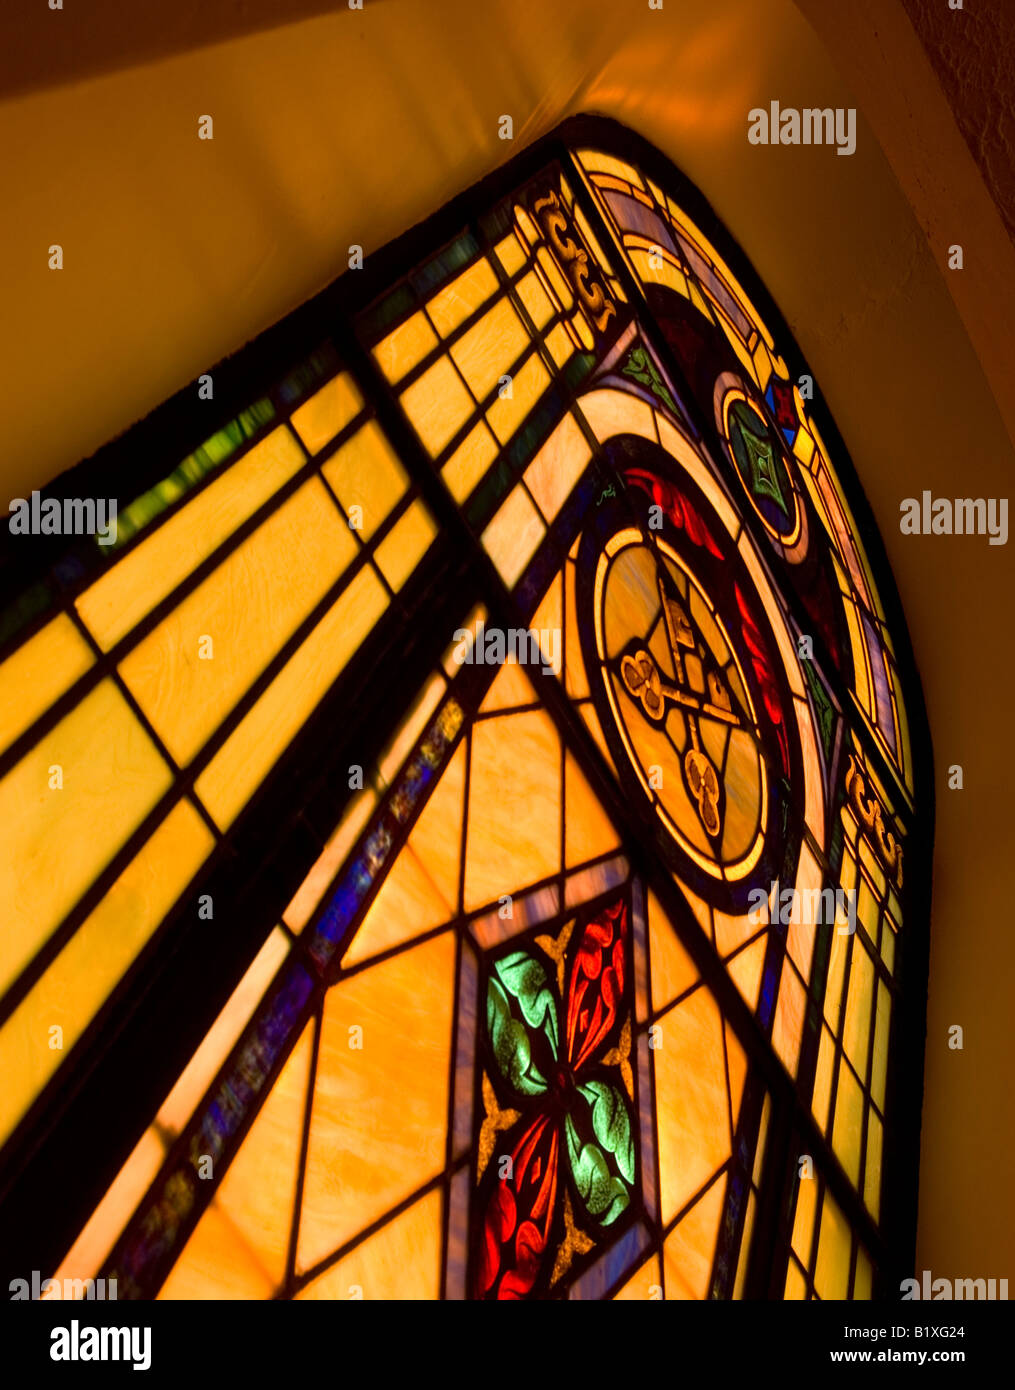 stain glass window in a church Stock Photo